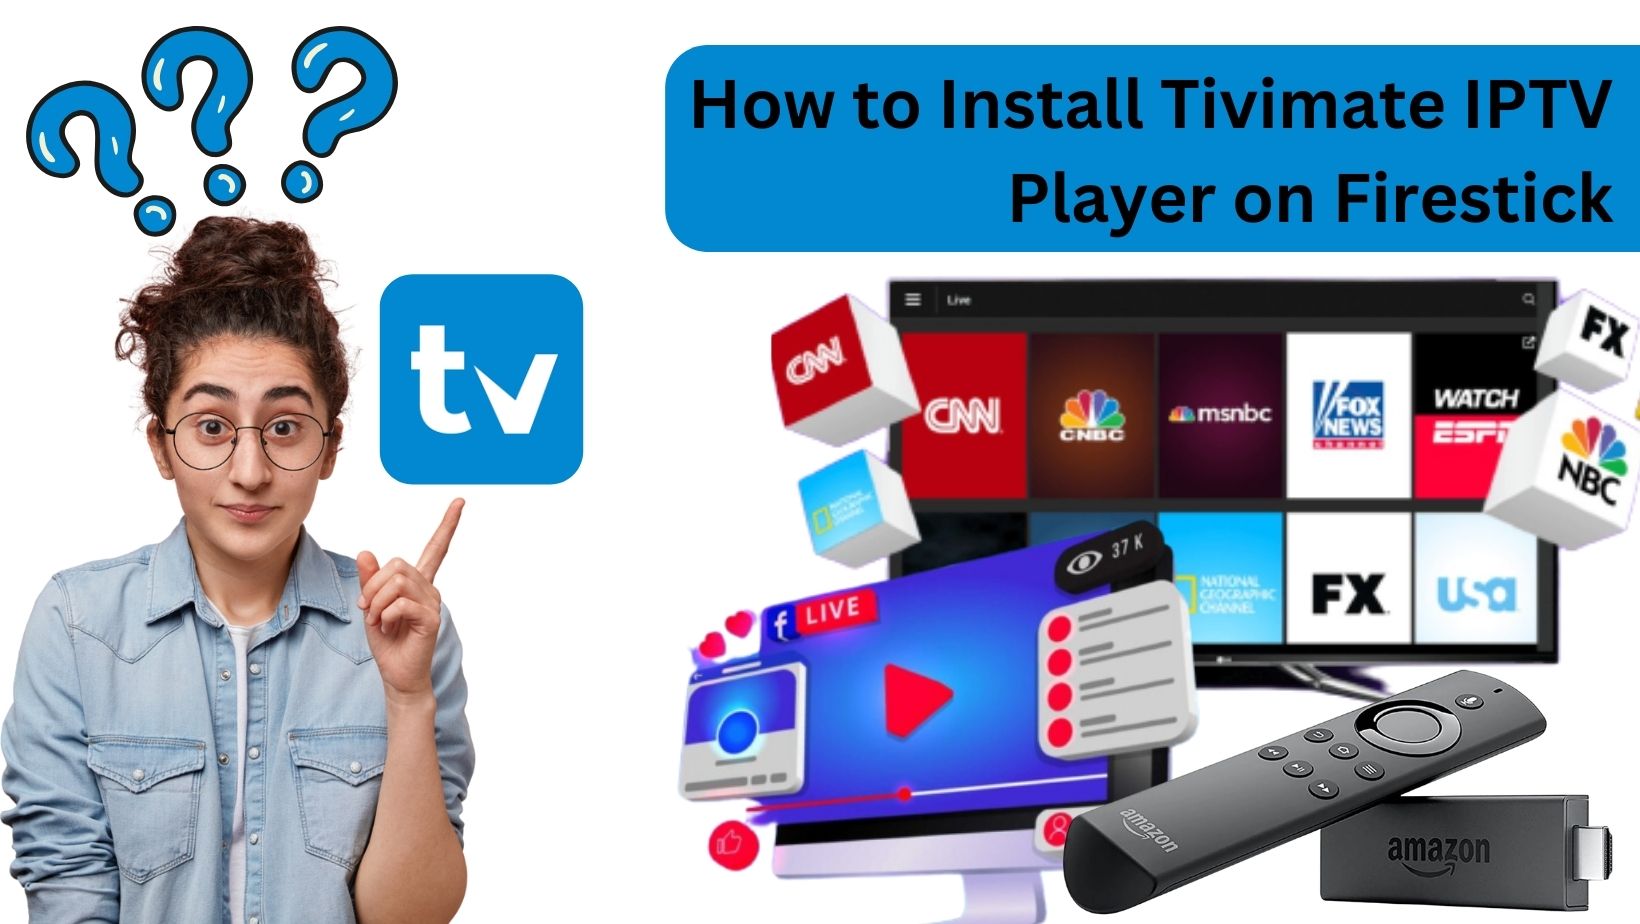 How To Install Tivimate Iptv Player On Firestick